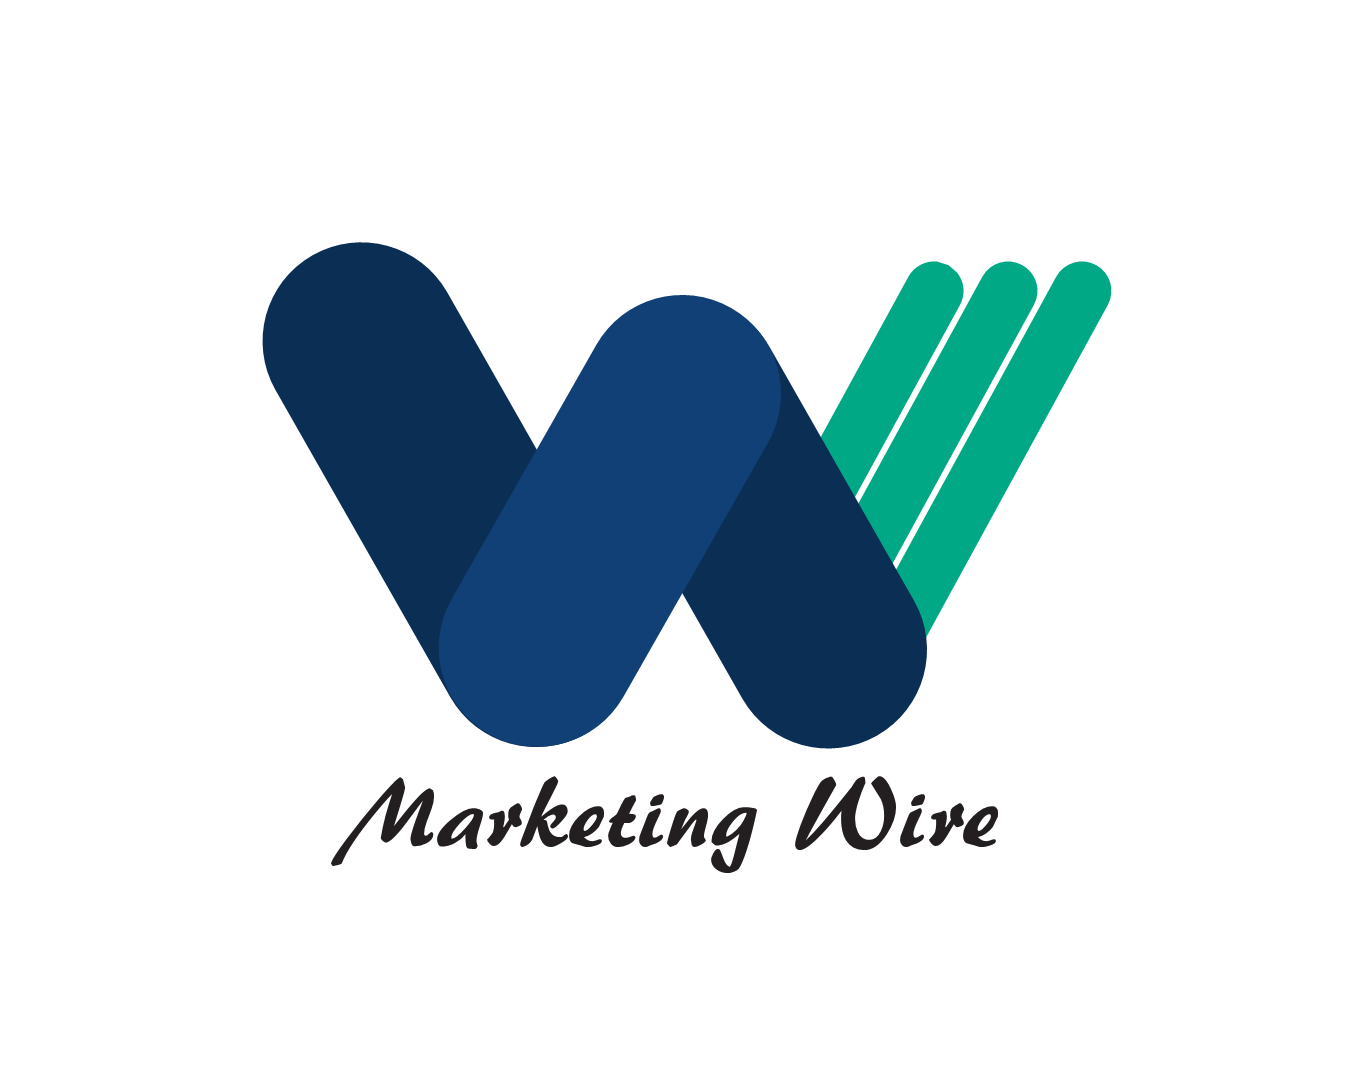 Wire Logo - File:Marketing Wire logo.png - Wikimedia Commons